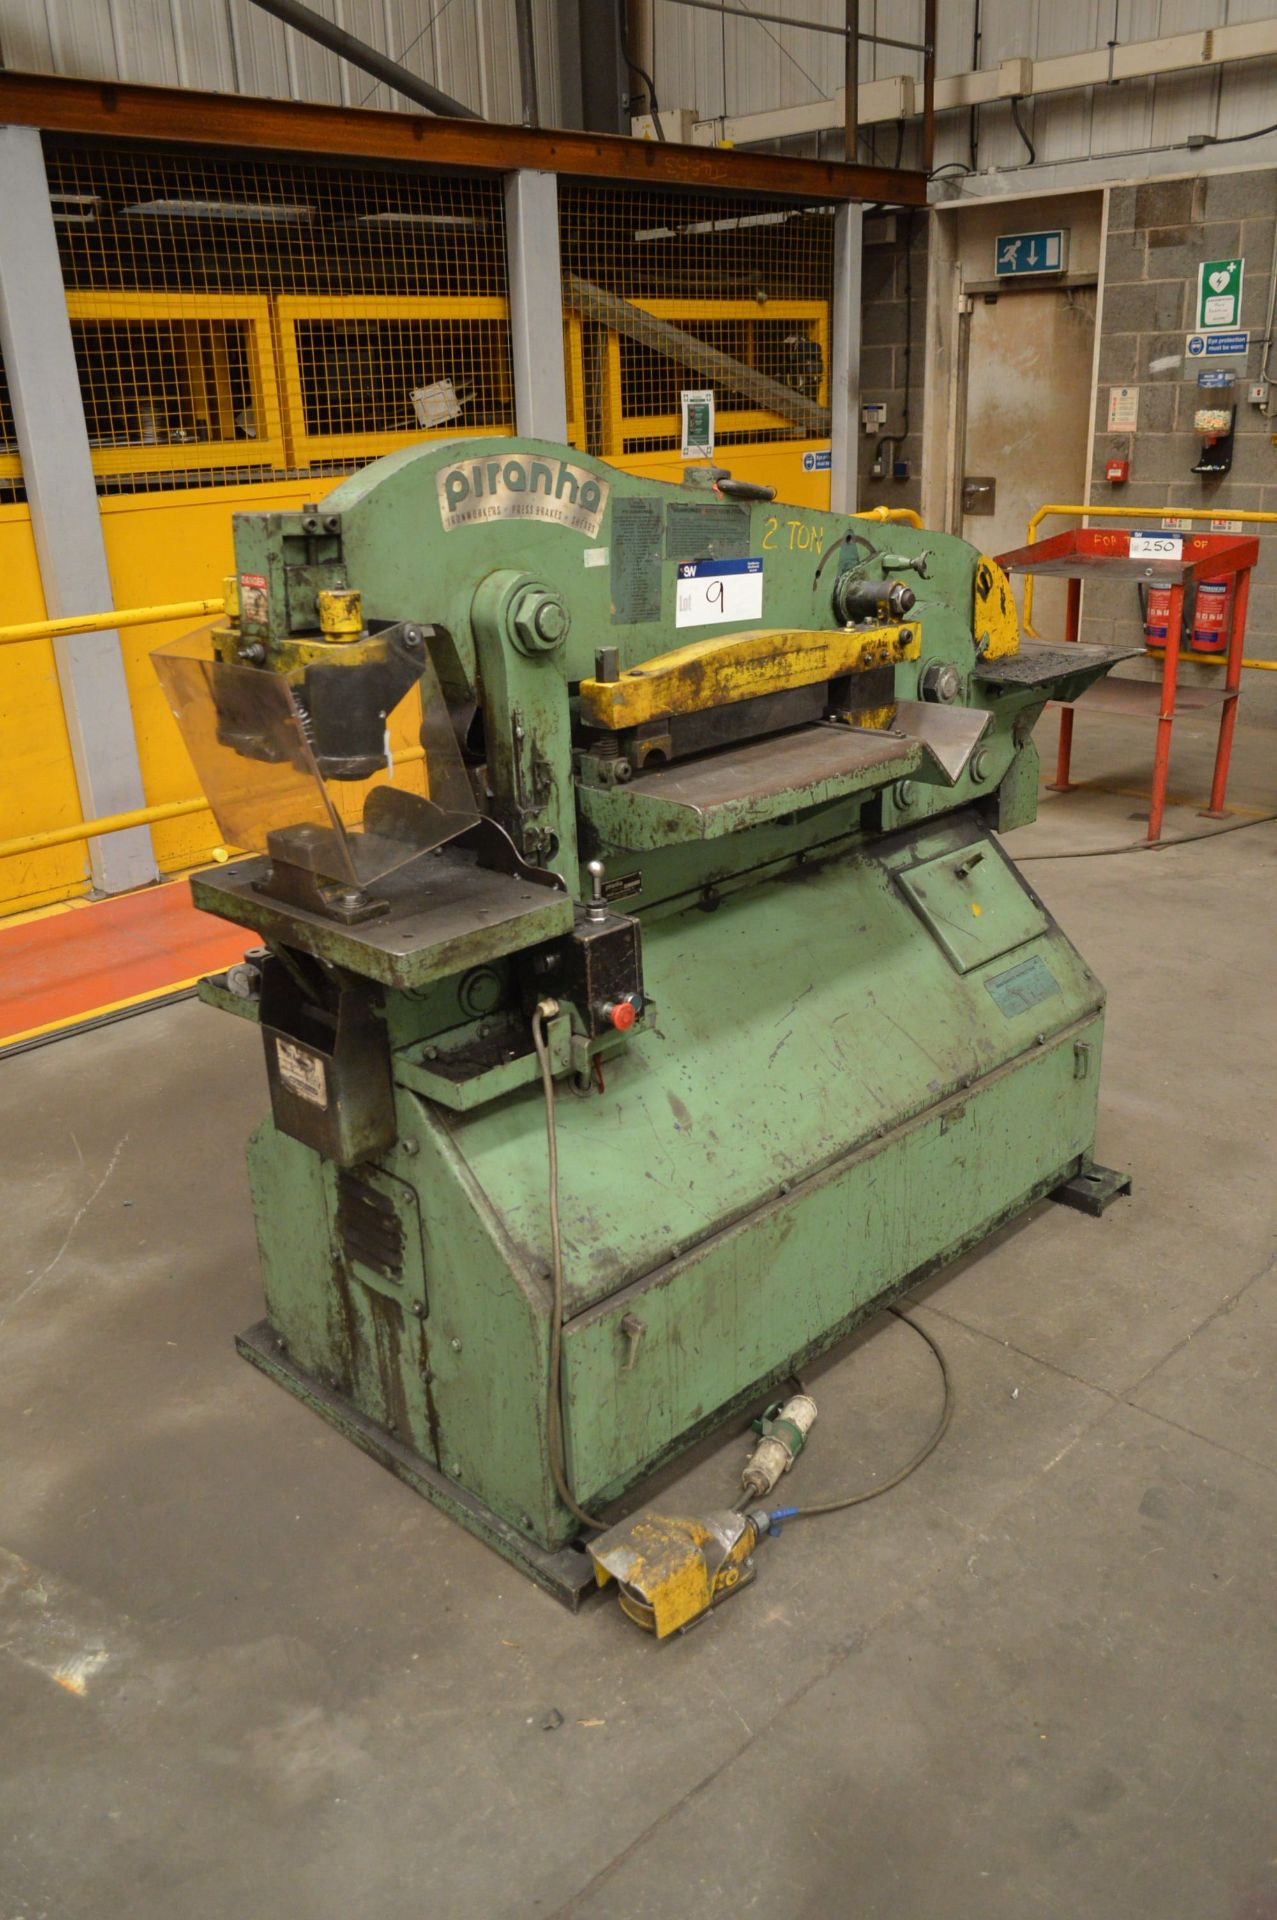 Piranha P70 HYDRAULIC IRON WORKER, serial no. P70-994, with tooling as set out